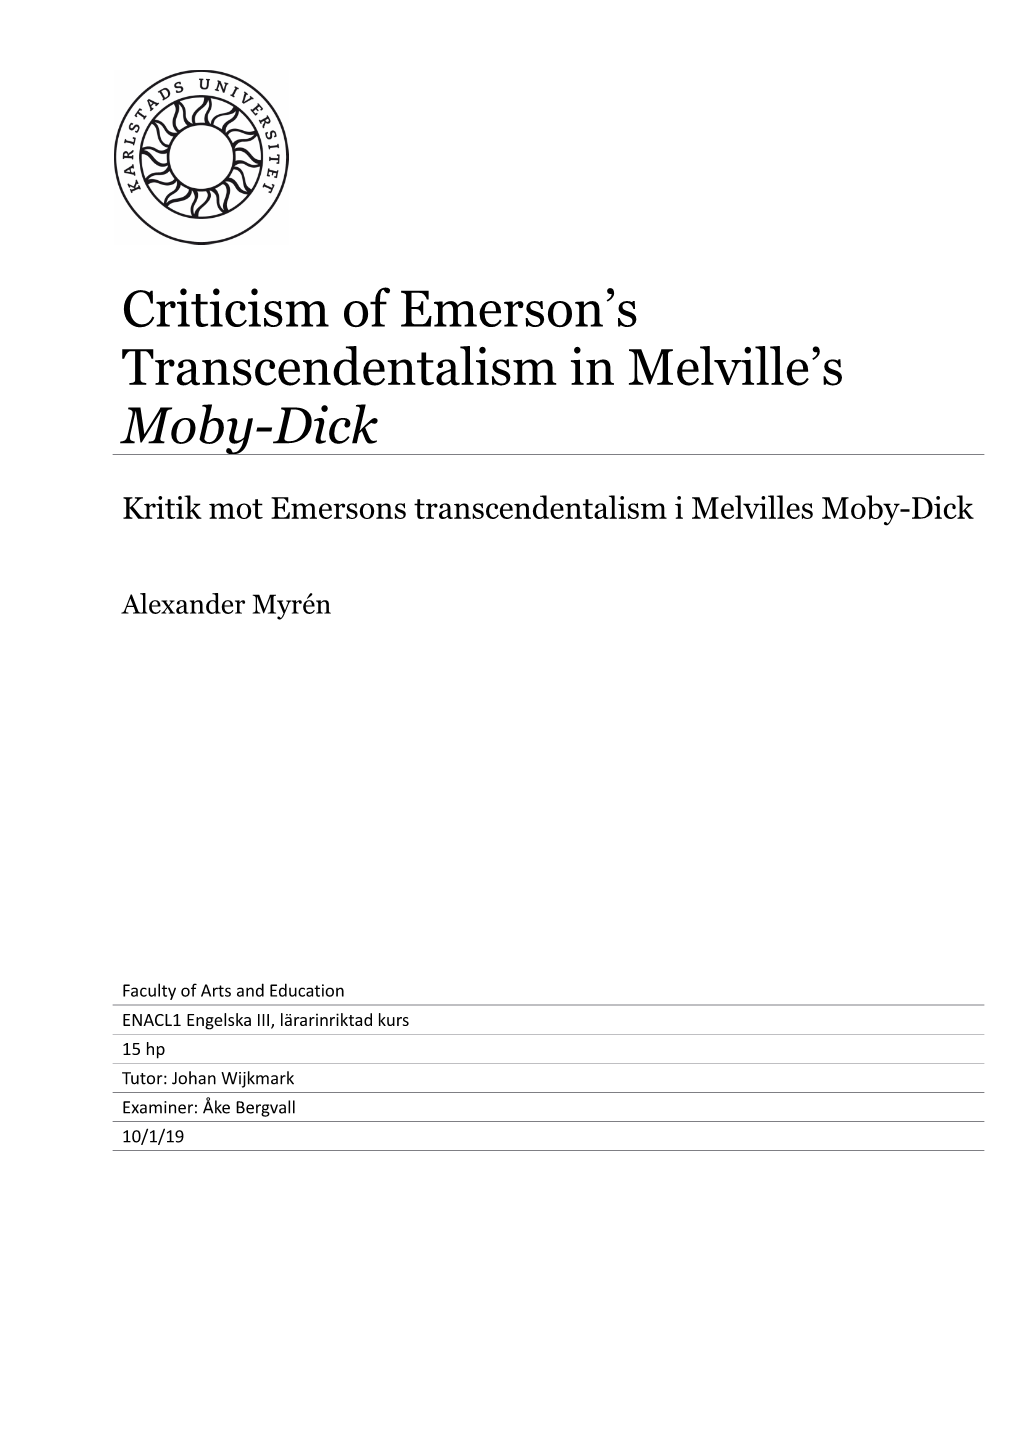 Criticism of Emerson's Transcendentalism in Melville's Moby-Dick